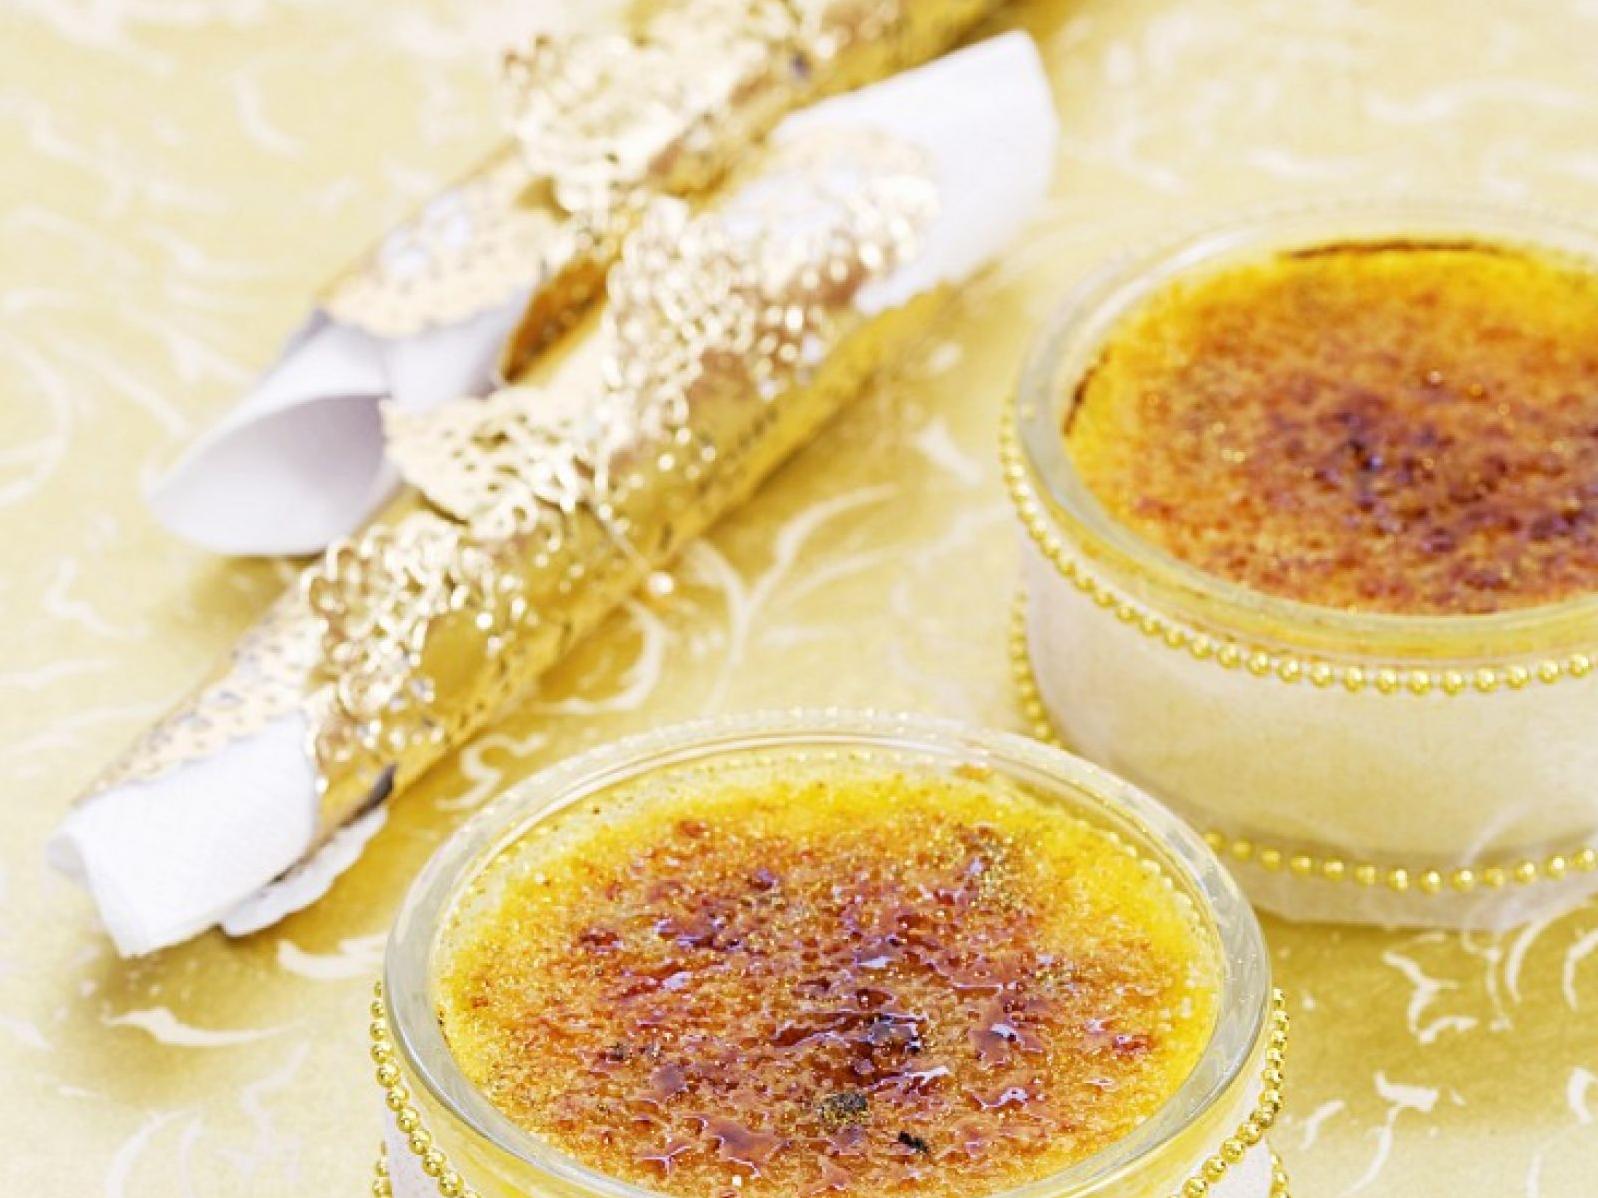  This dessert is simple, but impressive! Your guests will love this Champagne Creme Brulee recipe.